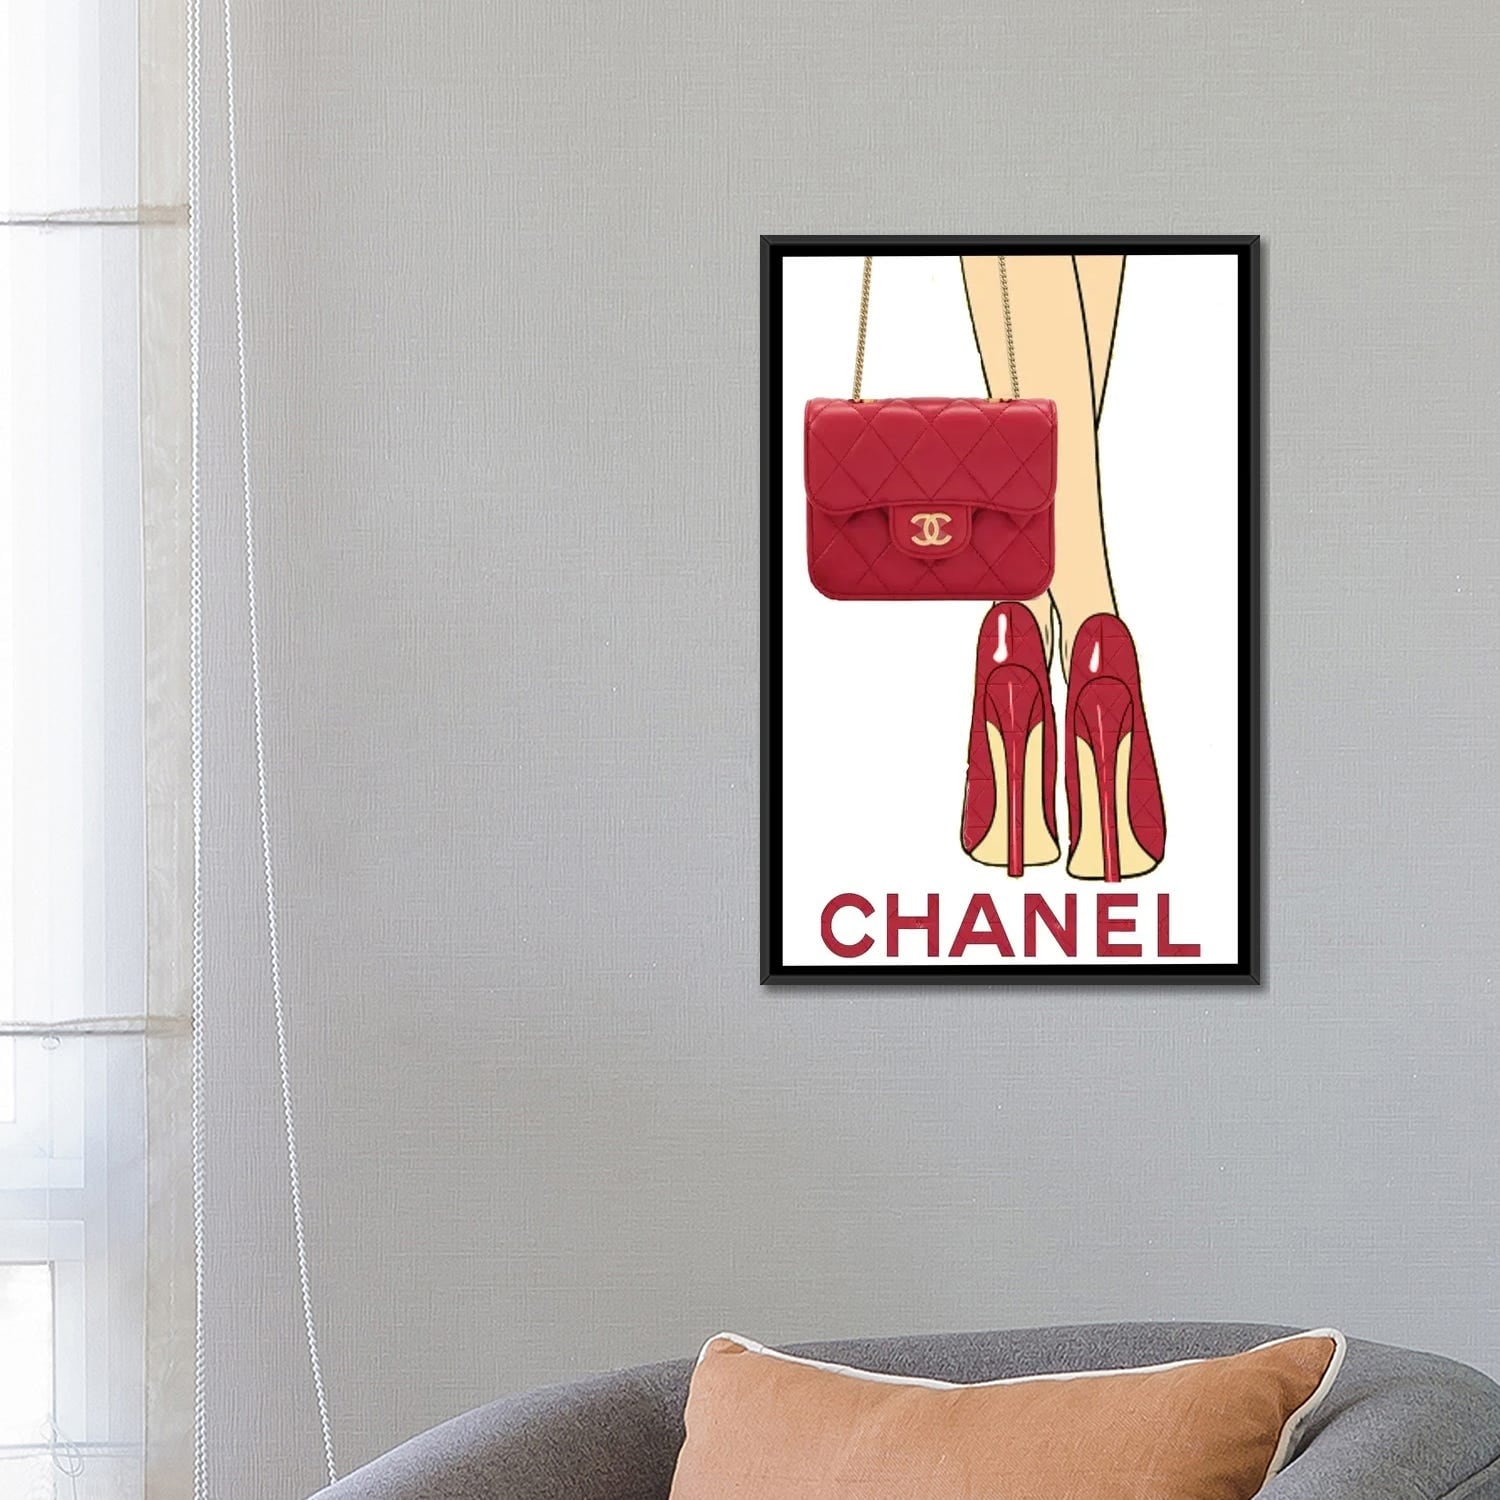 Framed Canvas Art (Champagne) - Chanel Bag by Julie Schreiber ( Fashion > Fashion Accessories > Bags & Purses art) - 26x18 in